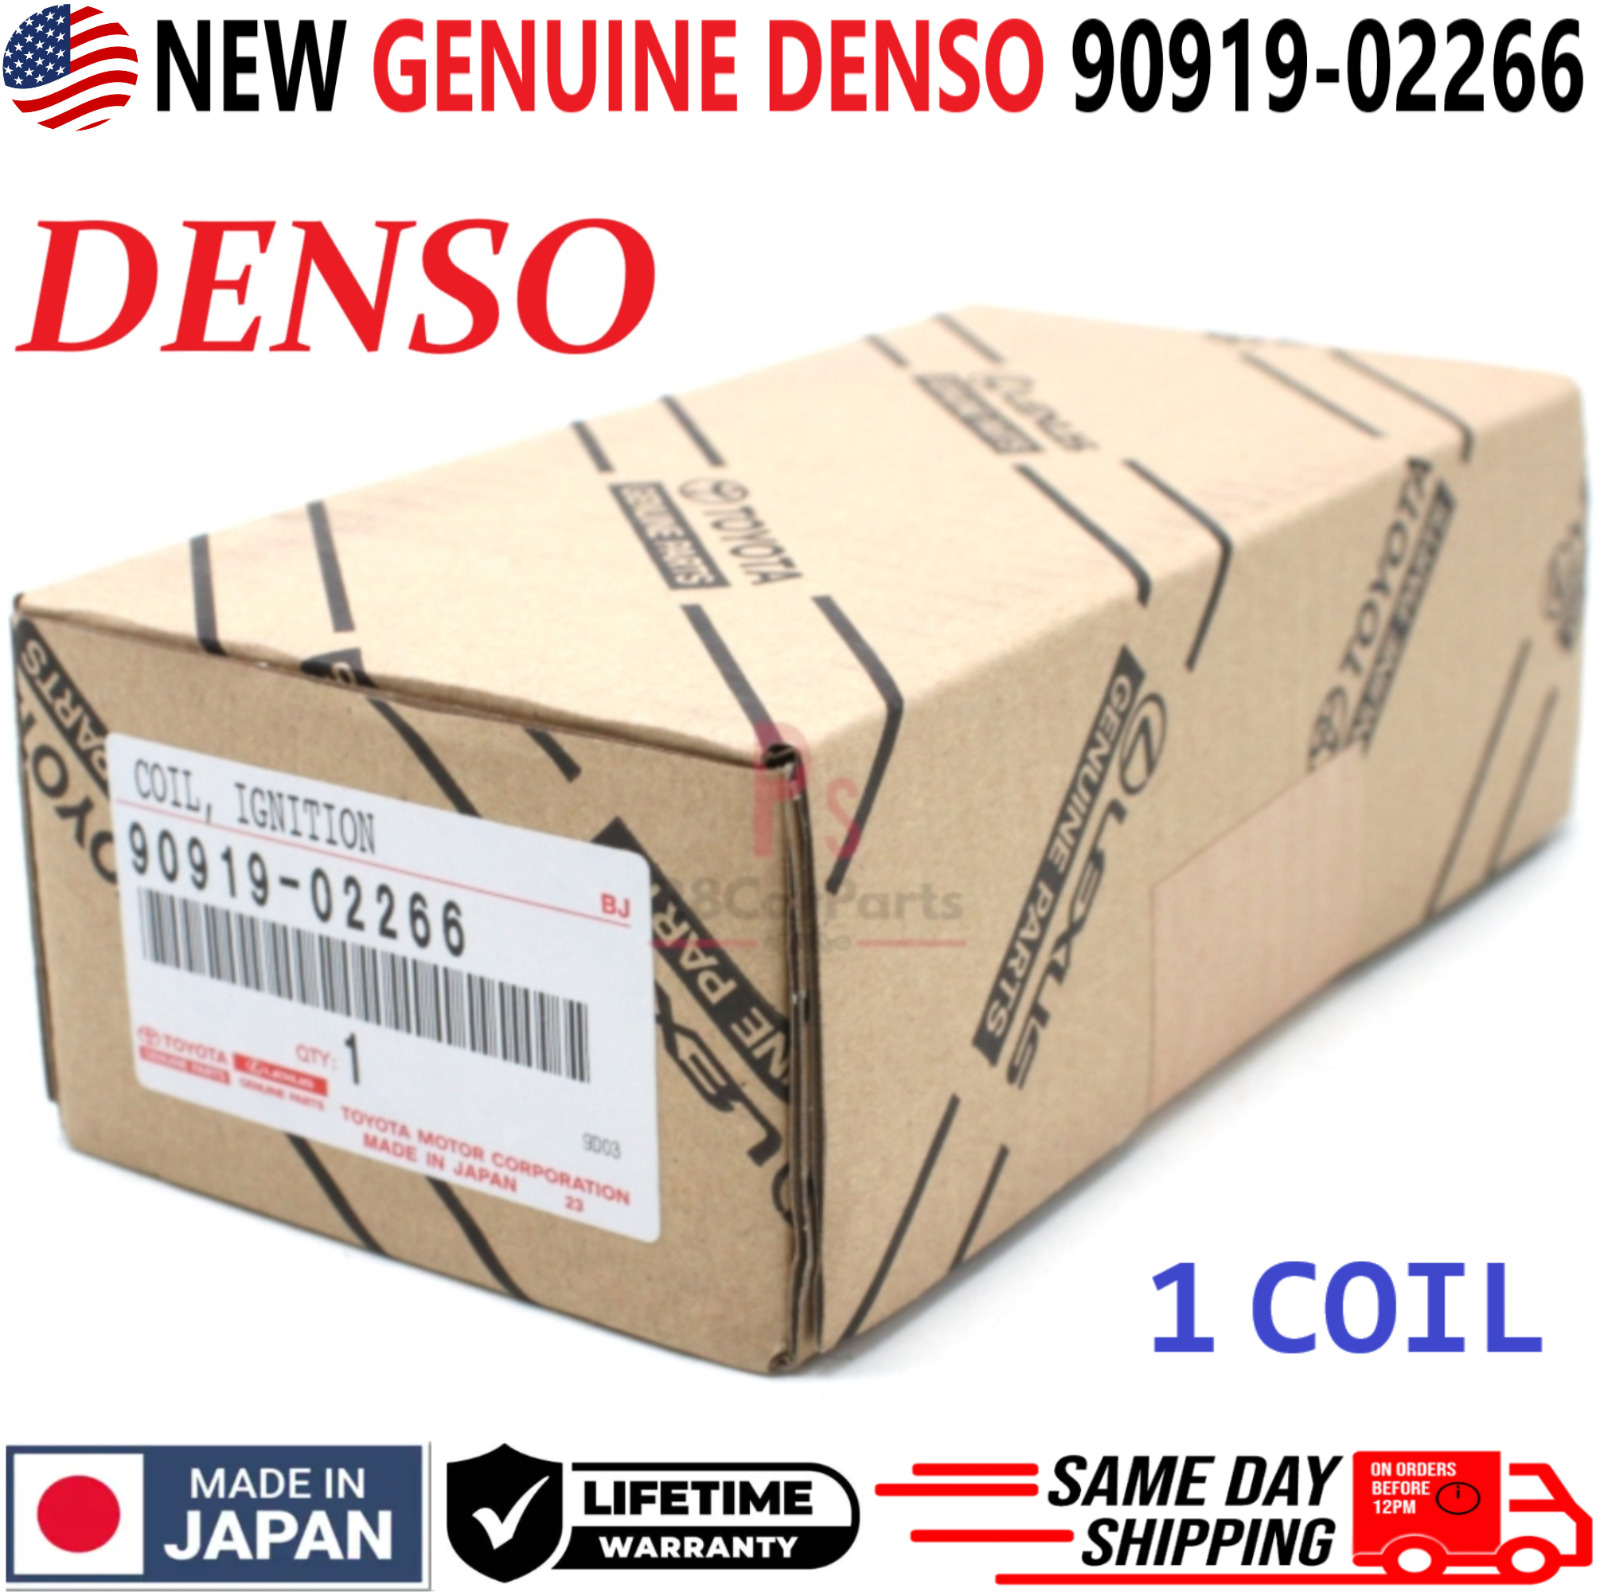 NEW OEM DENSO x1 Ignition Coil For 2001-2012 Toyota Lexus Scion I4, 90919-02266